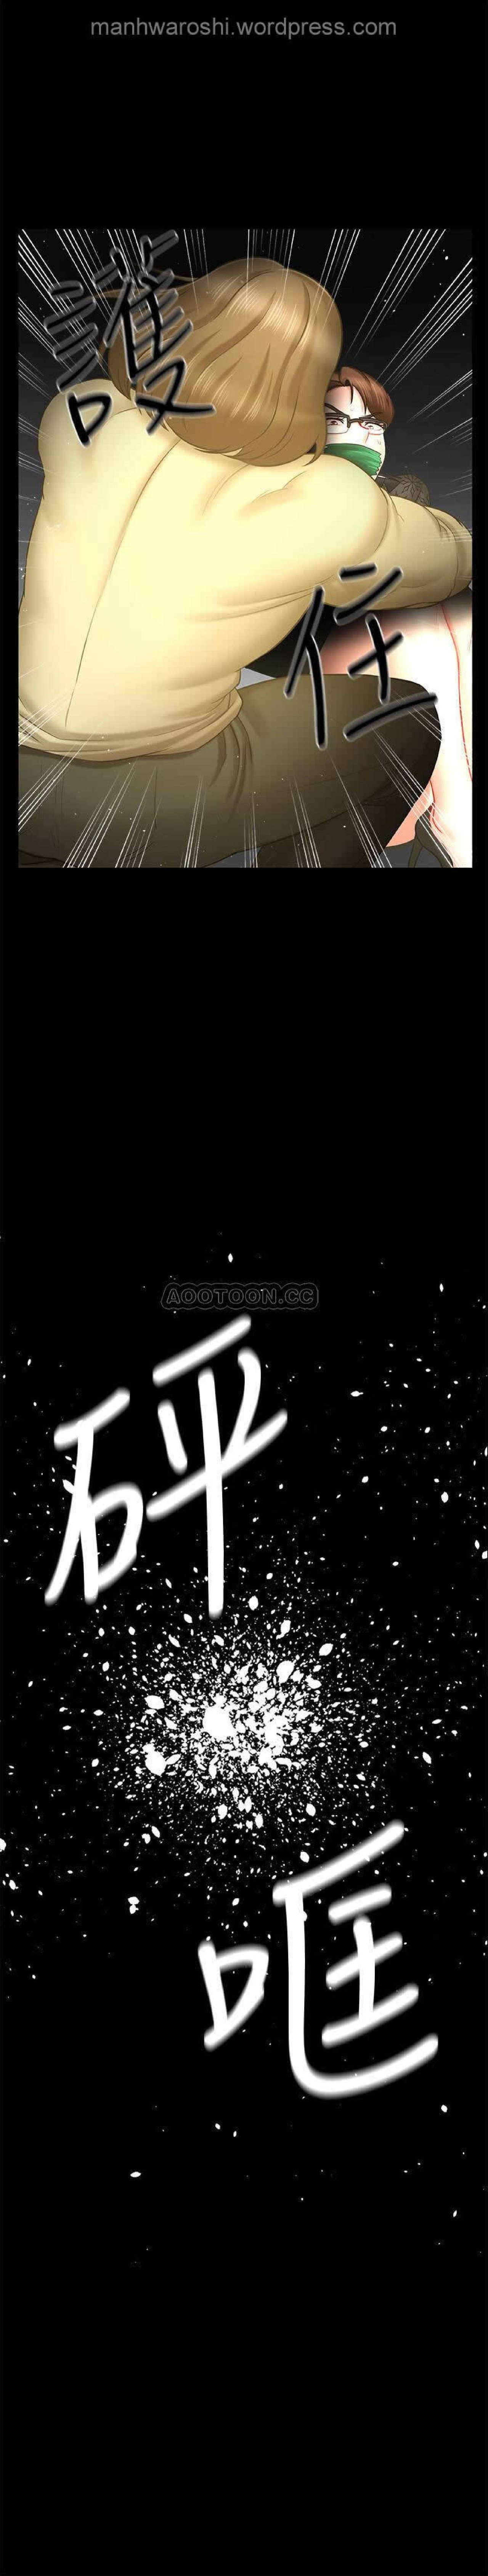 Sapphic Erotica 坏老师 | PHYSICAL CLASSROOM 12 [Chinese] Manhwa Coed - Picture 3